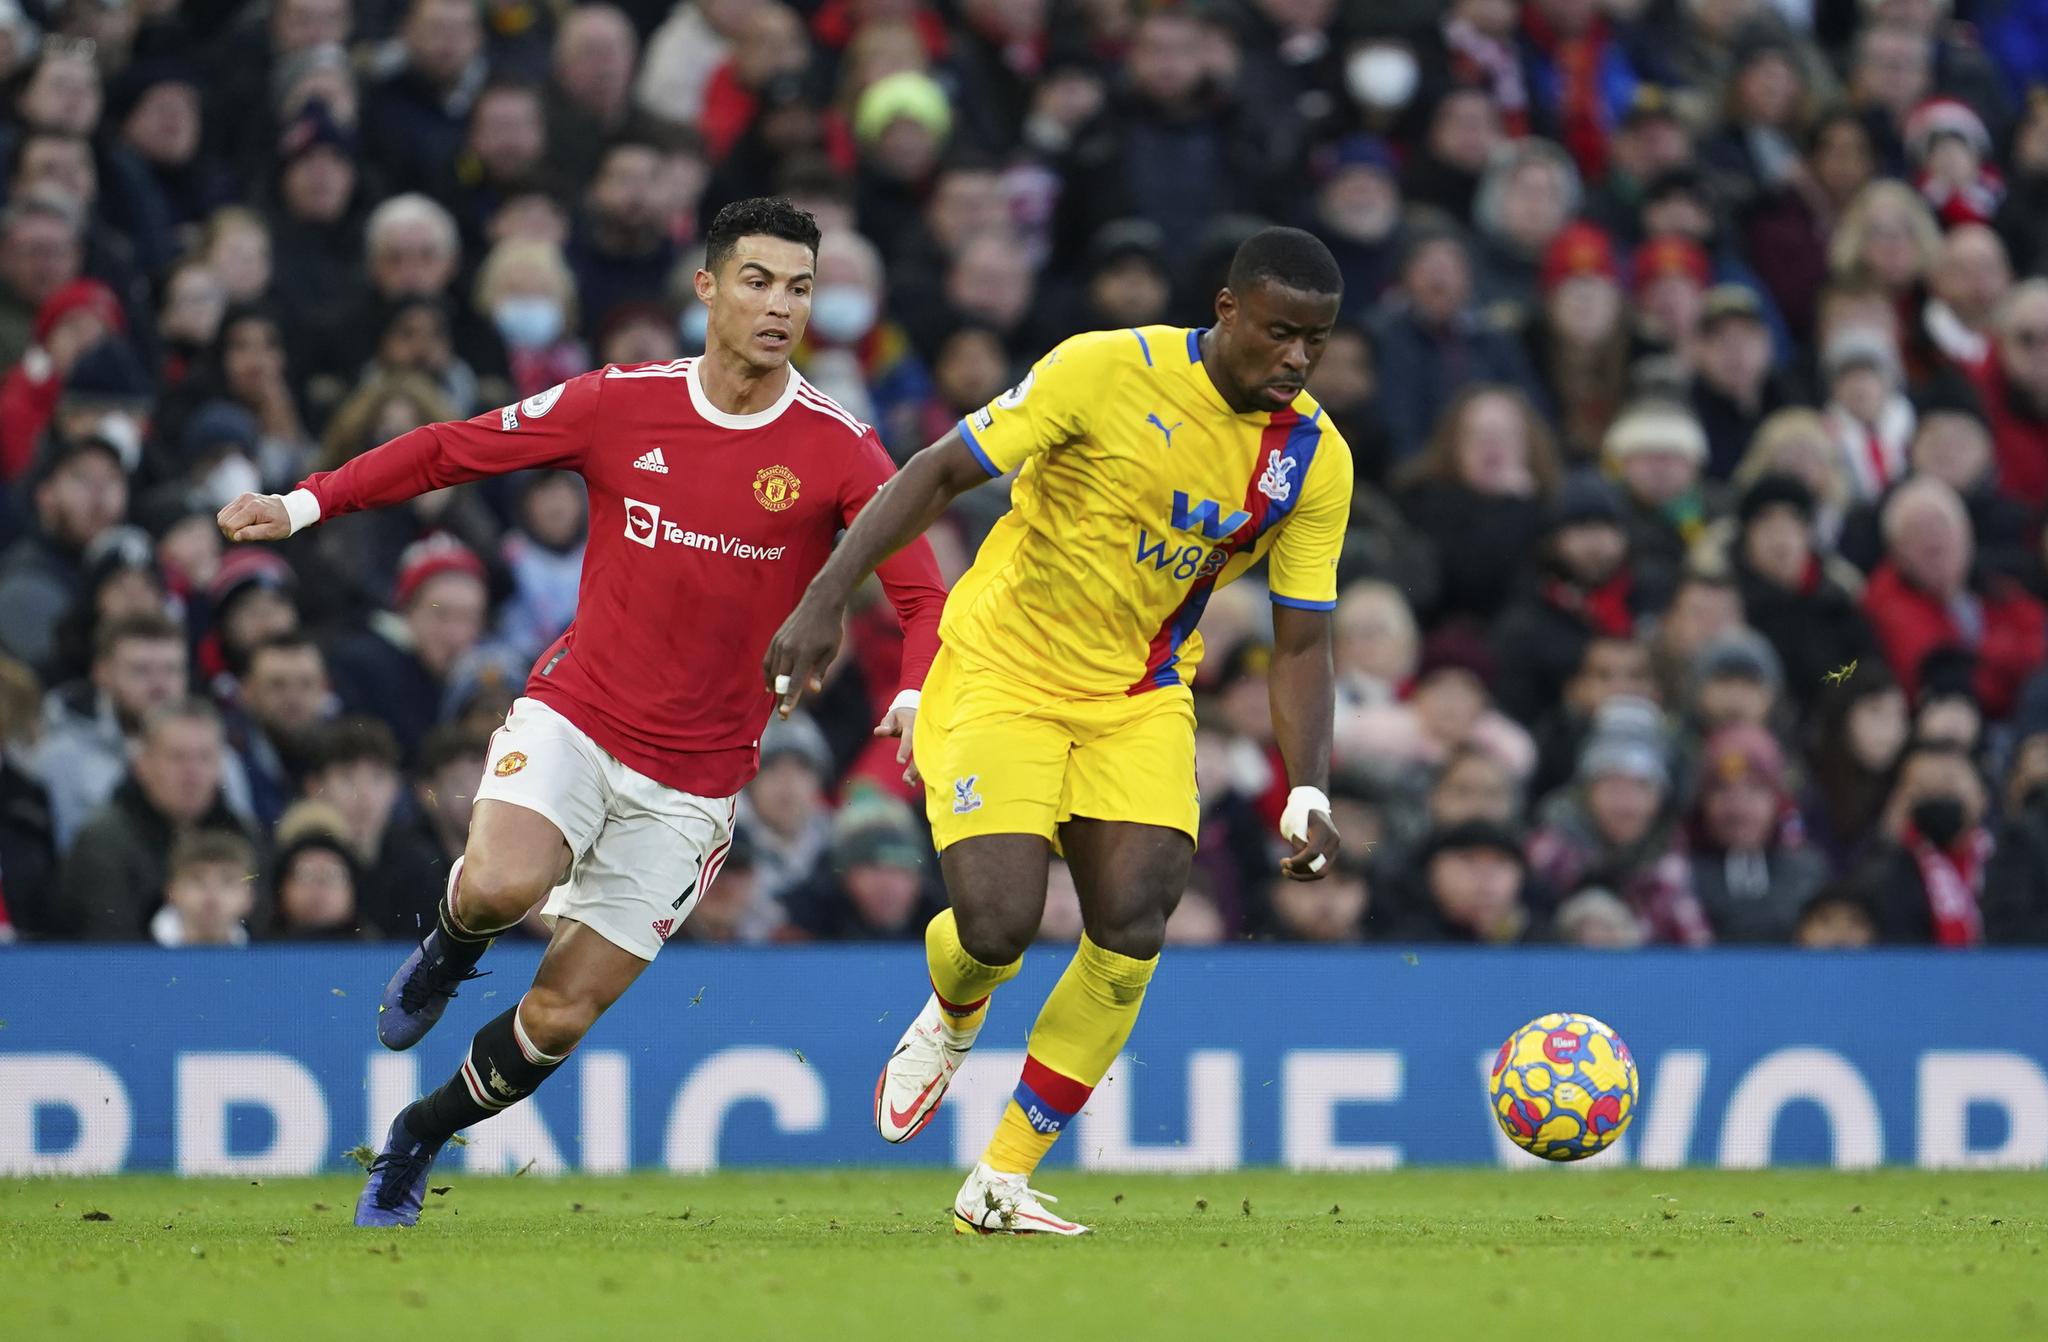 Crystal Palace vs Manchester United LIVE: Red Devils face Palace in a MUST-WIN game to qualify for Europa League, Follow Crystal Palace vs Man United LIVE Streaming: Team news, Predictions